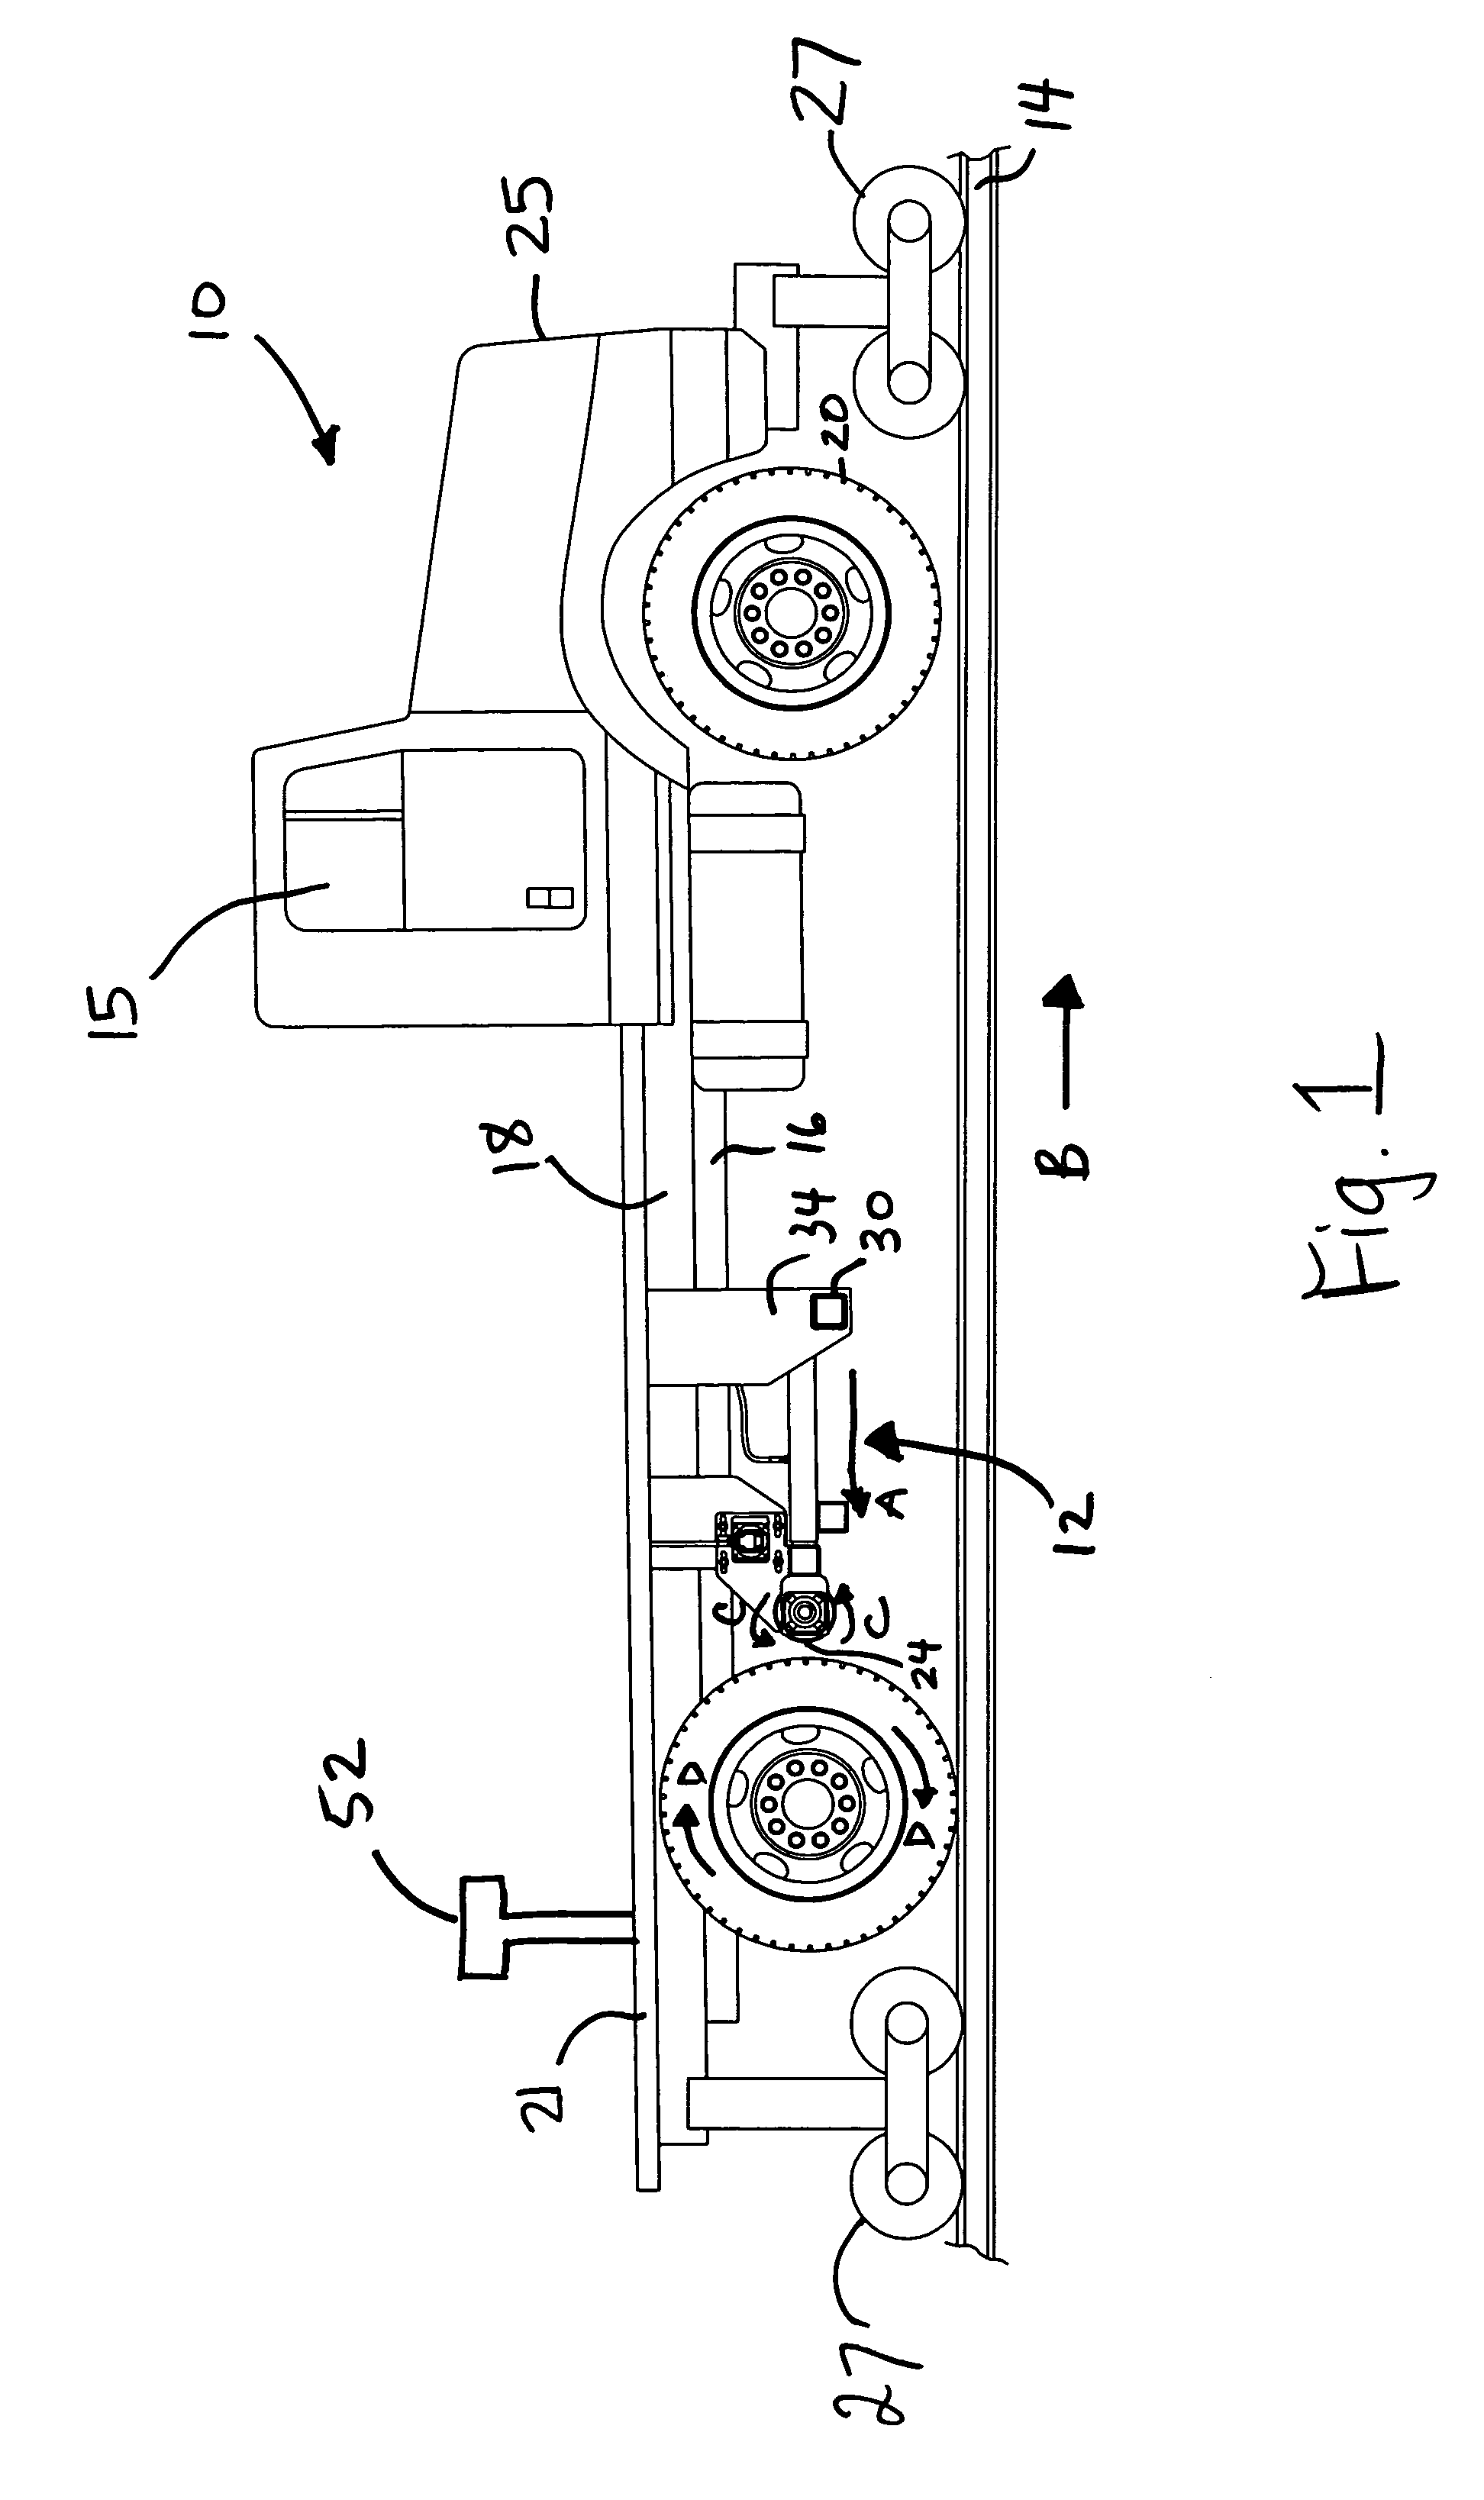 Method and apparatus for operating a vehicle on rails of a railroad track with an auxiliary drive assembly